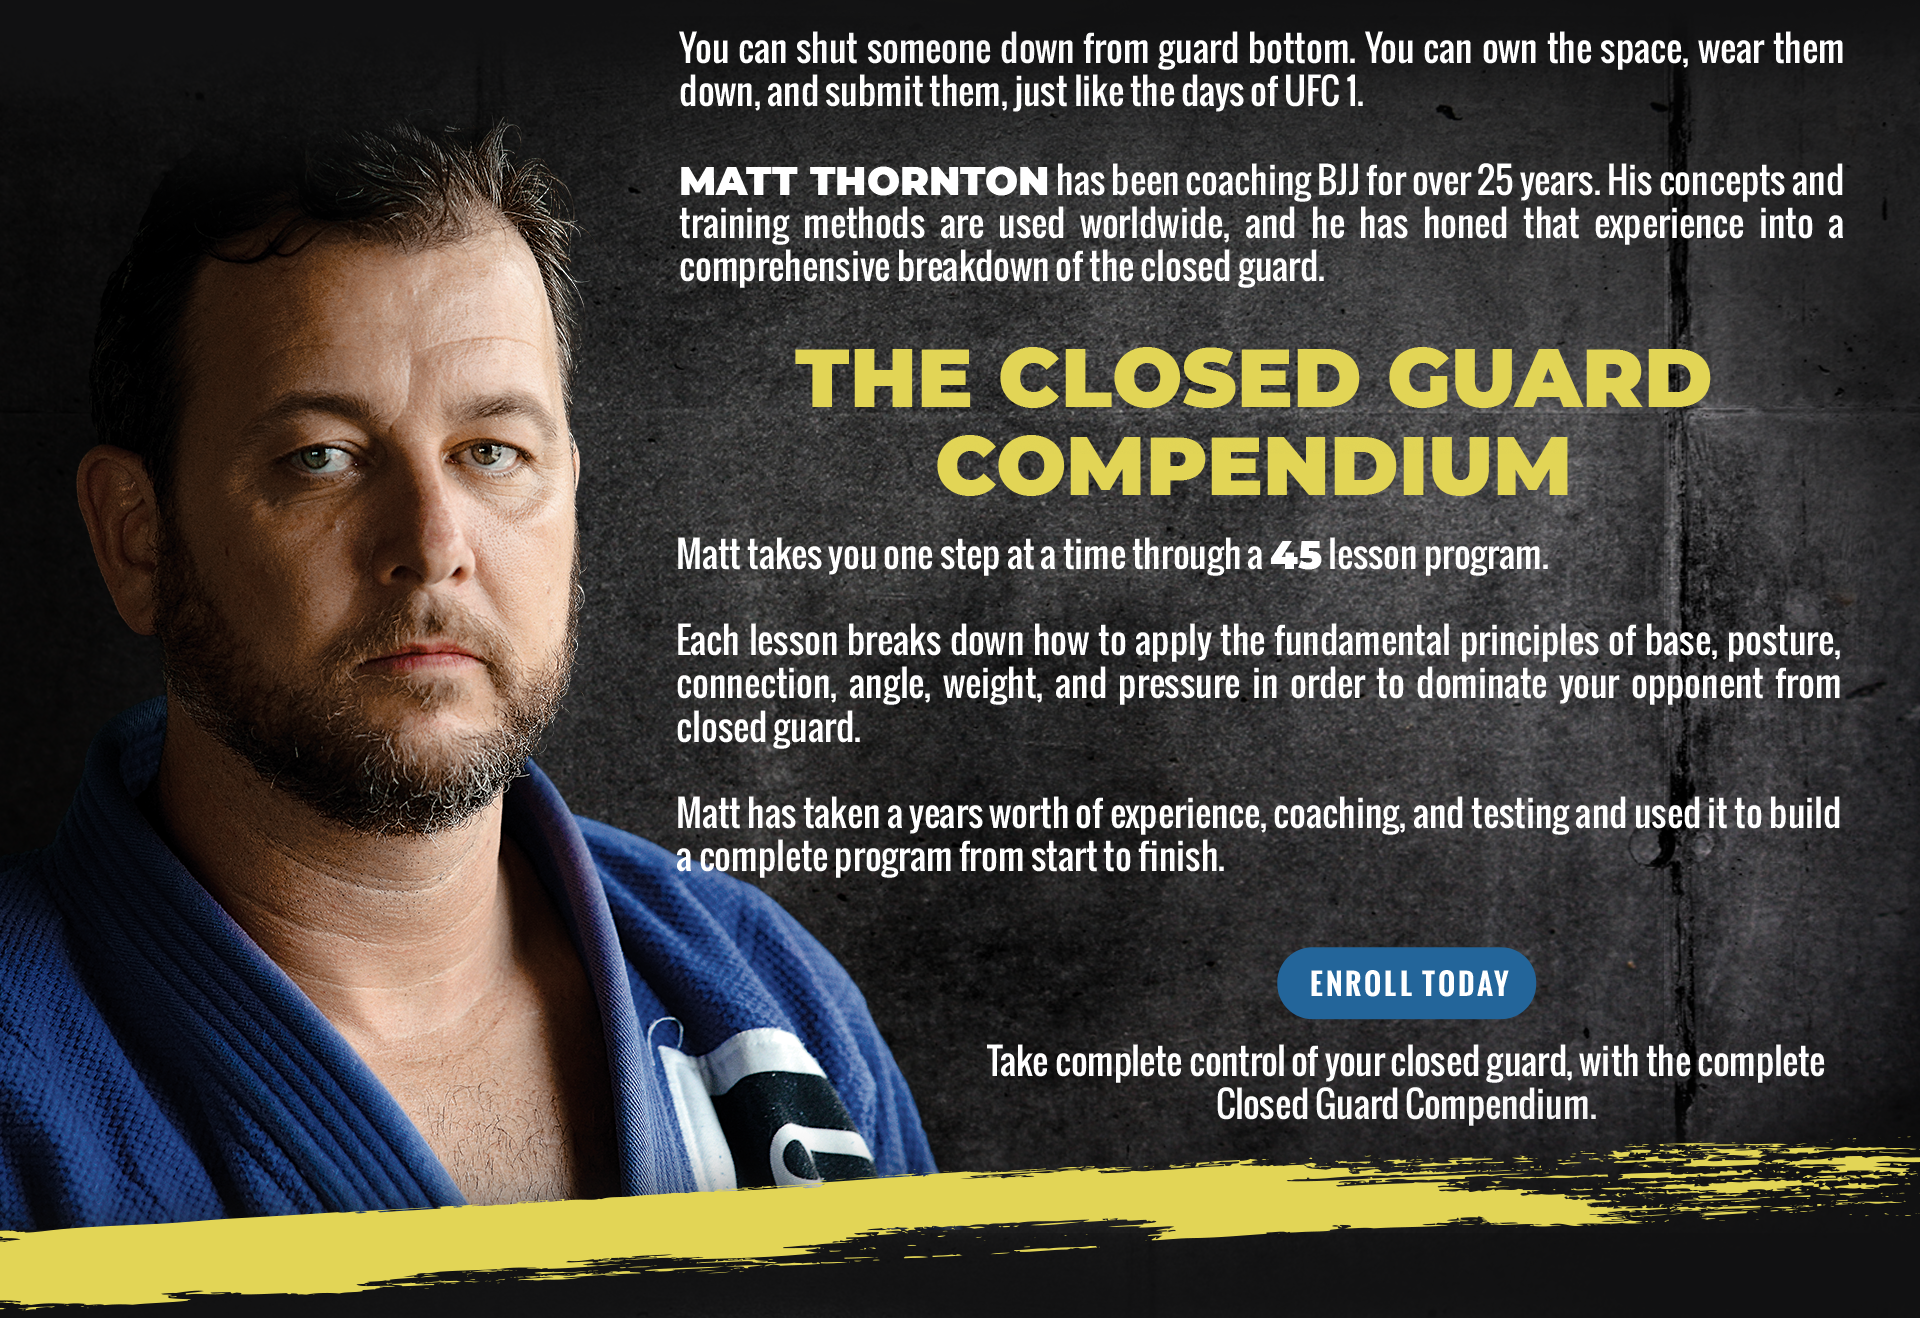 You can shut someone down from guard bottom. You can own the space, wear them down, and submit them, just like the days of UFC1. Matt Thornton has been coaching BJJ for over 25 years. His concepts and training methods are used worldwide and he has honed that experience into a comprehensive breakdown of the closed guard. The Closed Guard Compendium Matt takes you one step at a time through a 45 lesson program. Each lesson breaks down how to apply the fundamental principles of base, posture, connection, angle, weight, and pressure in order to dominate your opponent from closed guard. Matt has taken years worth of experience coaching and testing and used I to build a complete program from start to finish. Take complete control of your closed guard, with complete Closed Guard Compendium. 